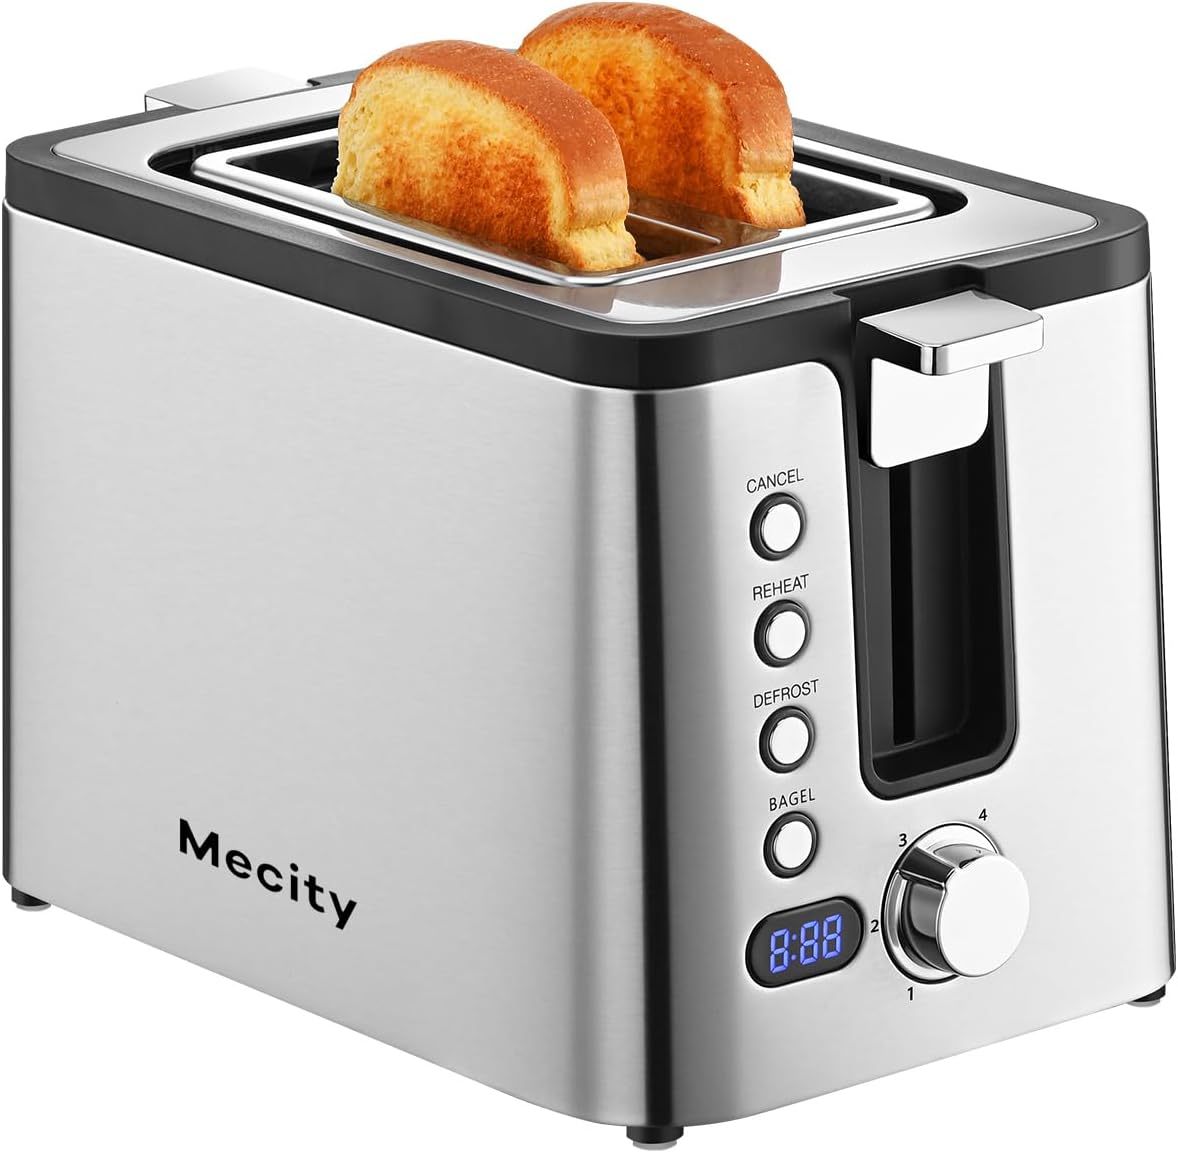 Mecity Toaster 2 Slice Stainless Steel Toaster Countdown Timer, Bagel/Defrost/Reheat/Cancel Functions,Warming Rack, Removable Tray, 6 Browning Settings, Extra Wide Slots, Bread Toaster, 800W